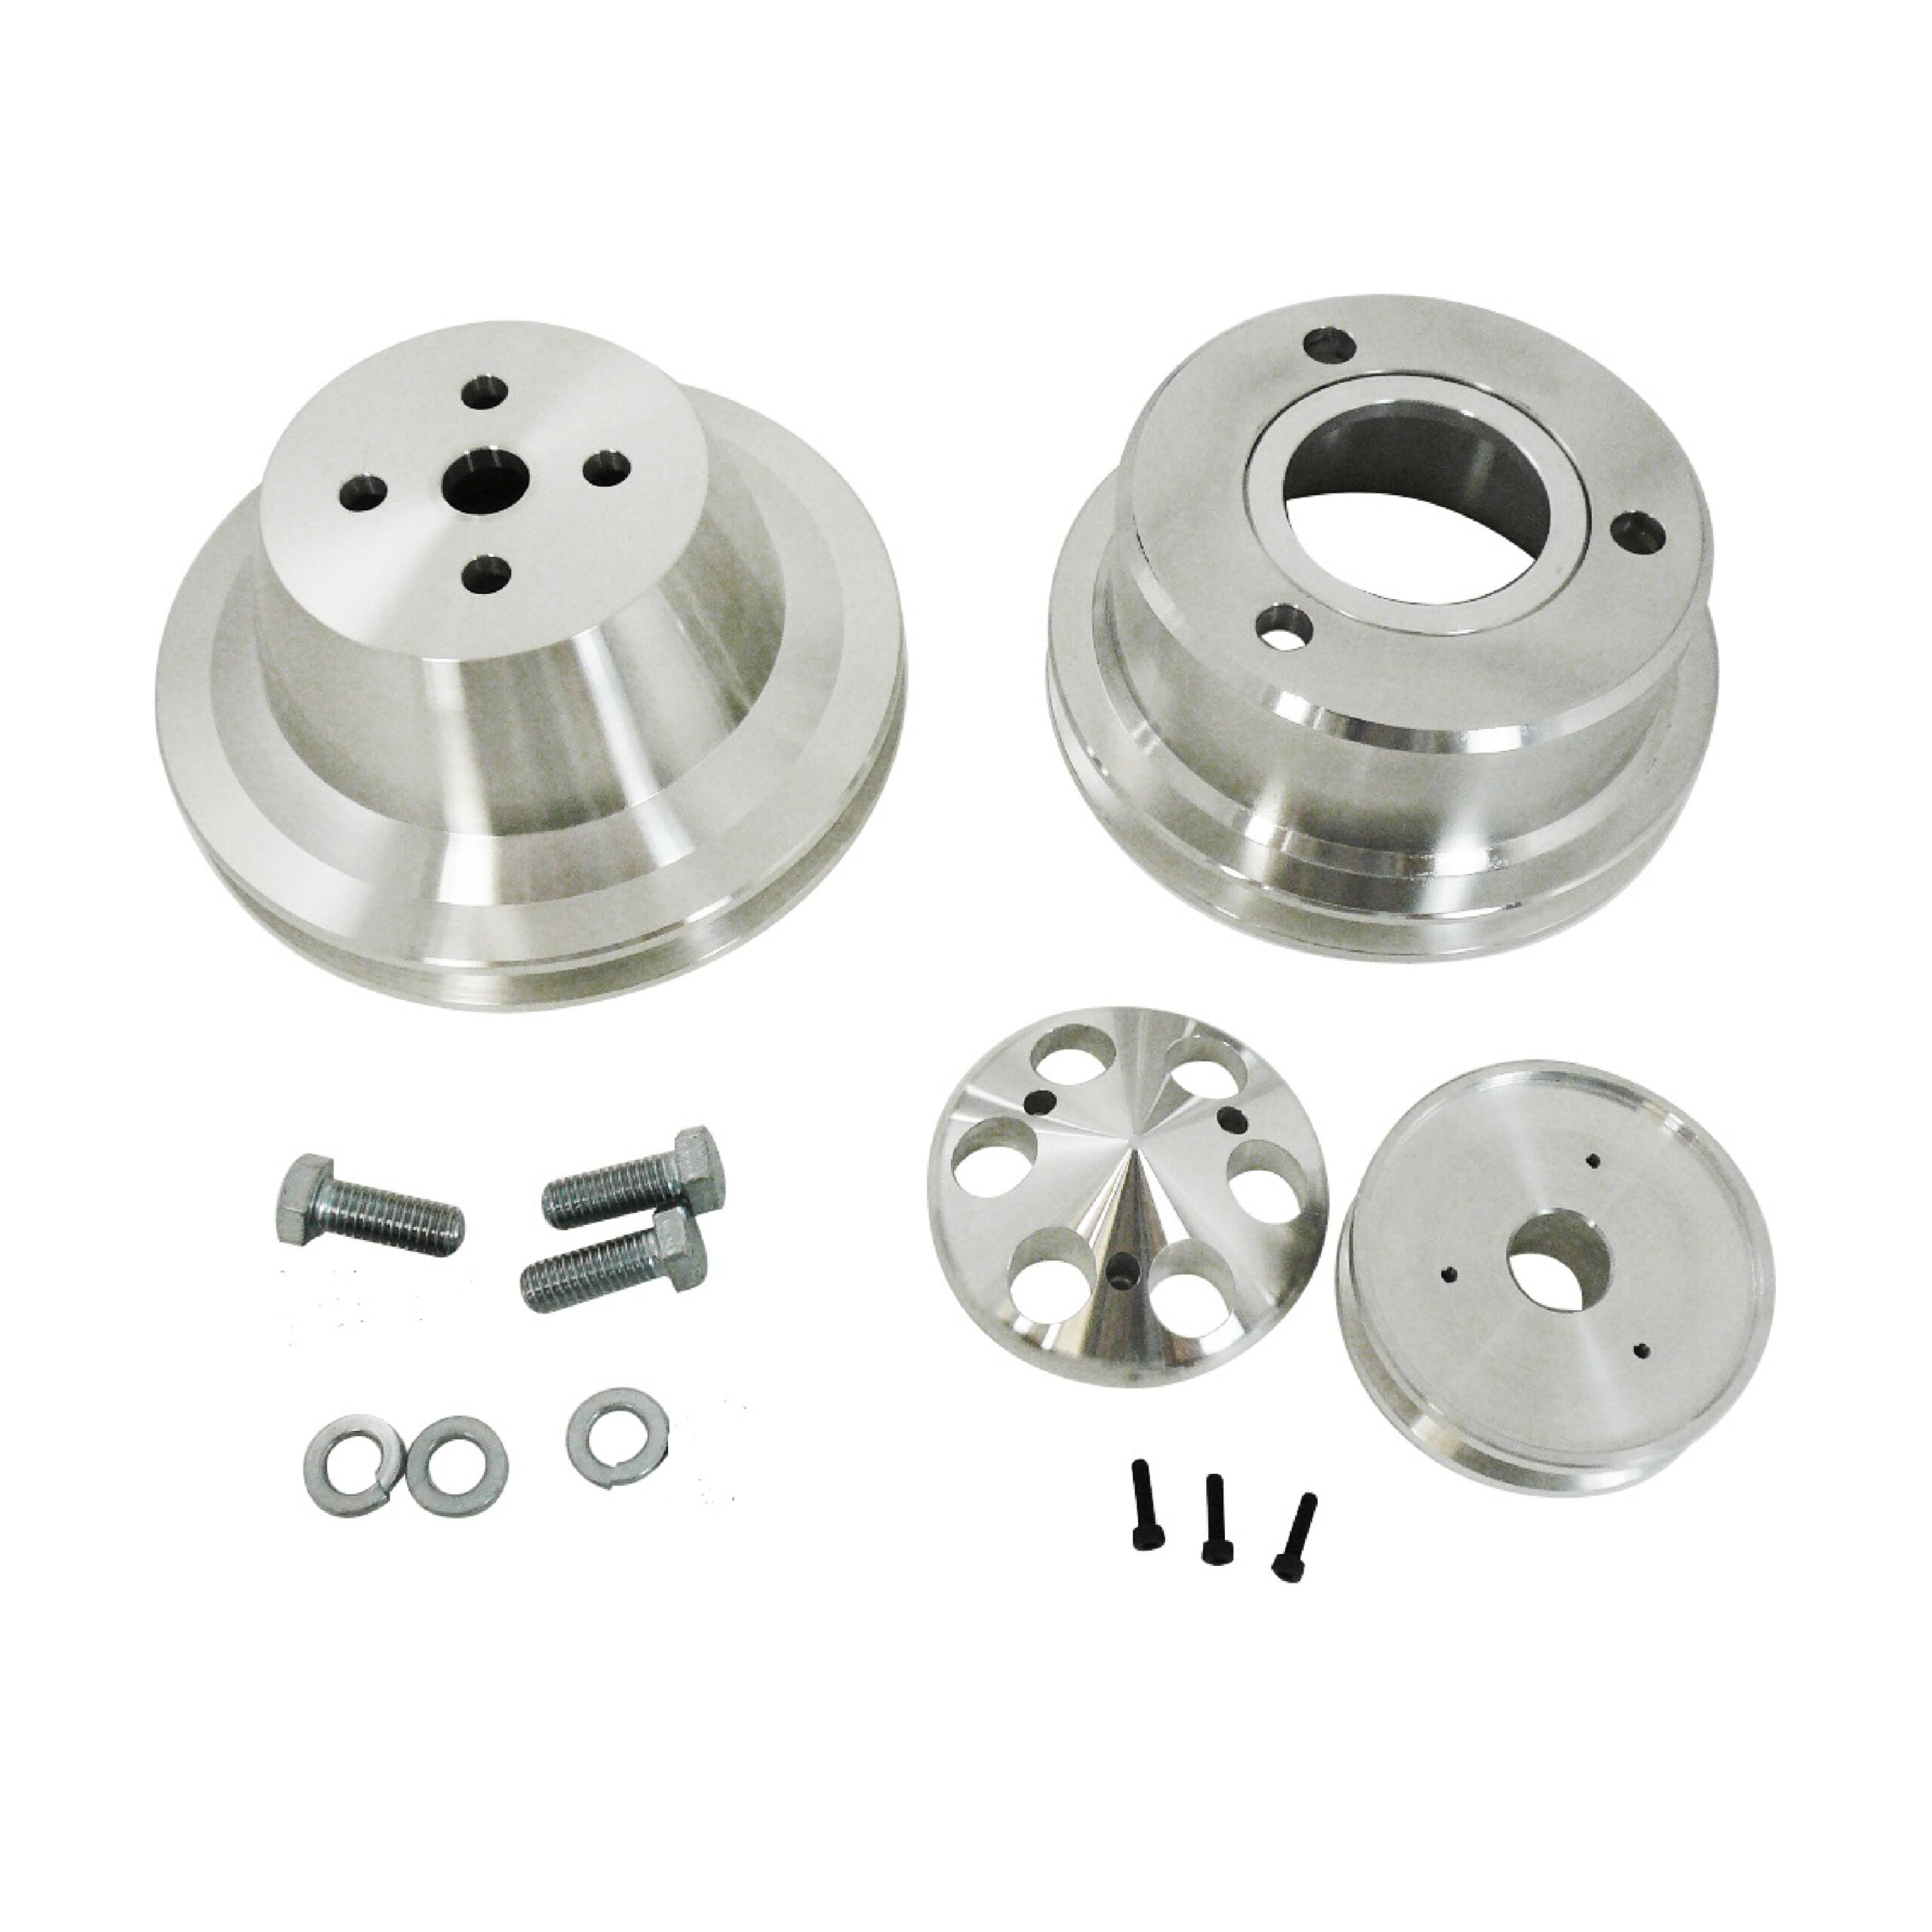 ROADFAR Belt Drive Pulley Kit Pulley Set with Long Water Pump Pulley with Alternator Pulley Compatible with the Small Block FORD 289 302 & 351W Engines 